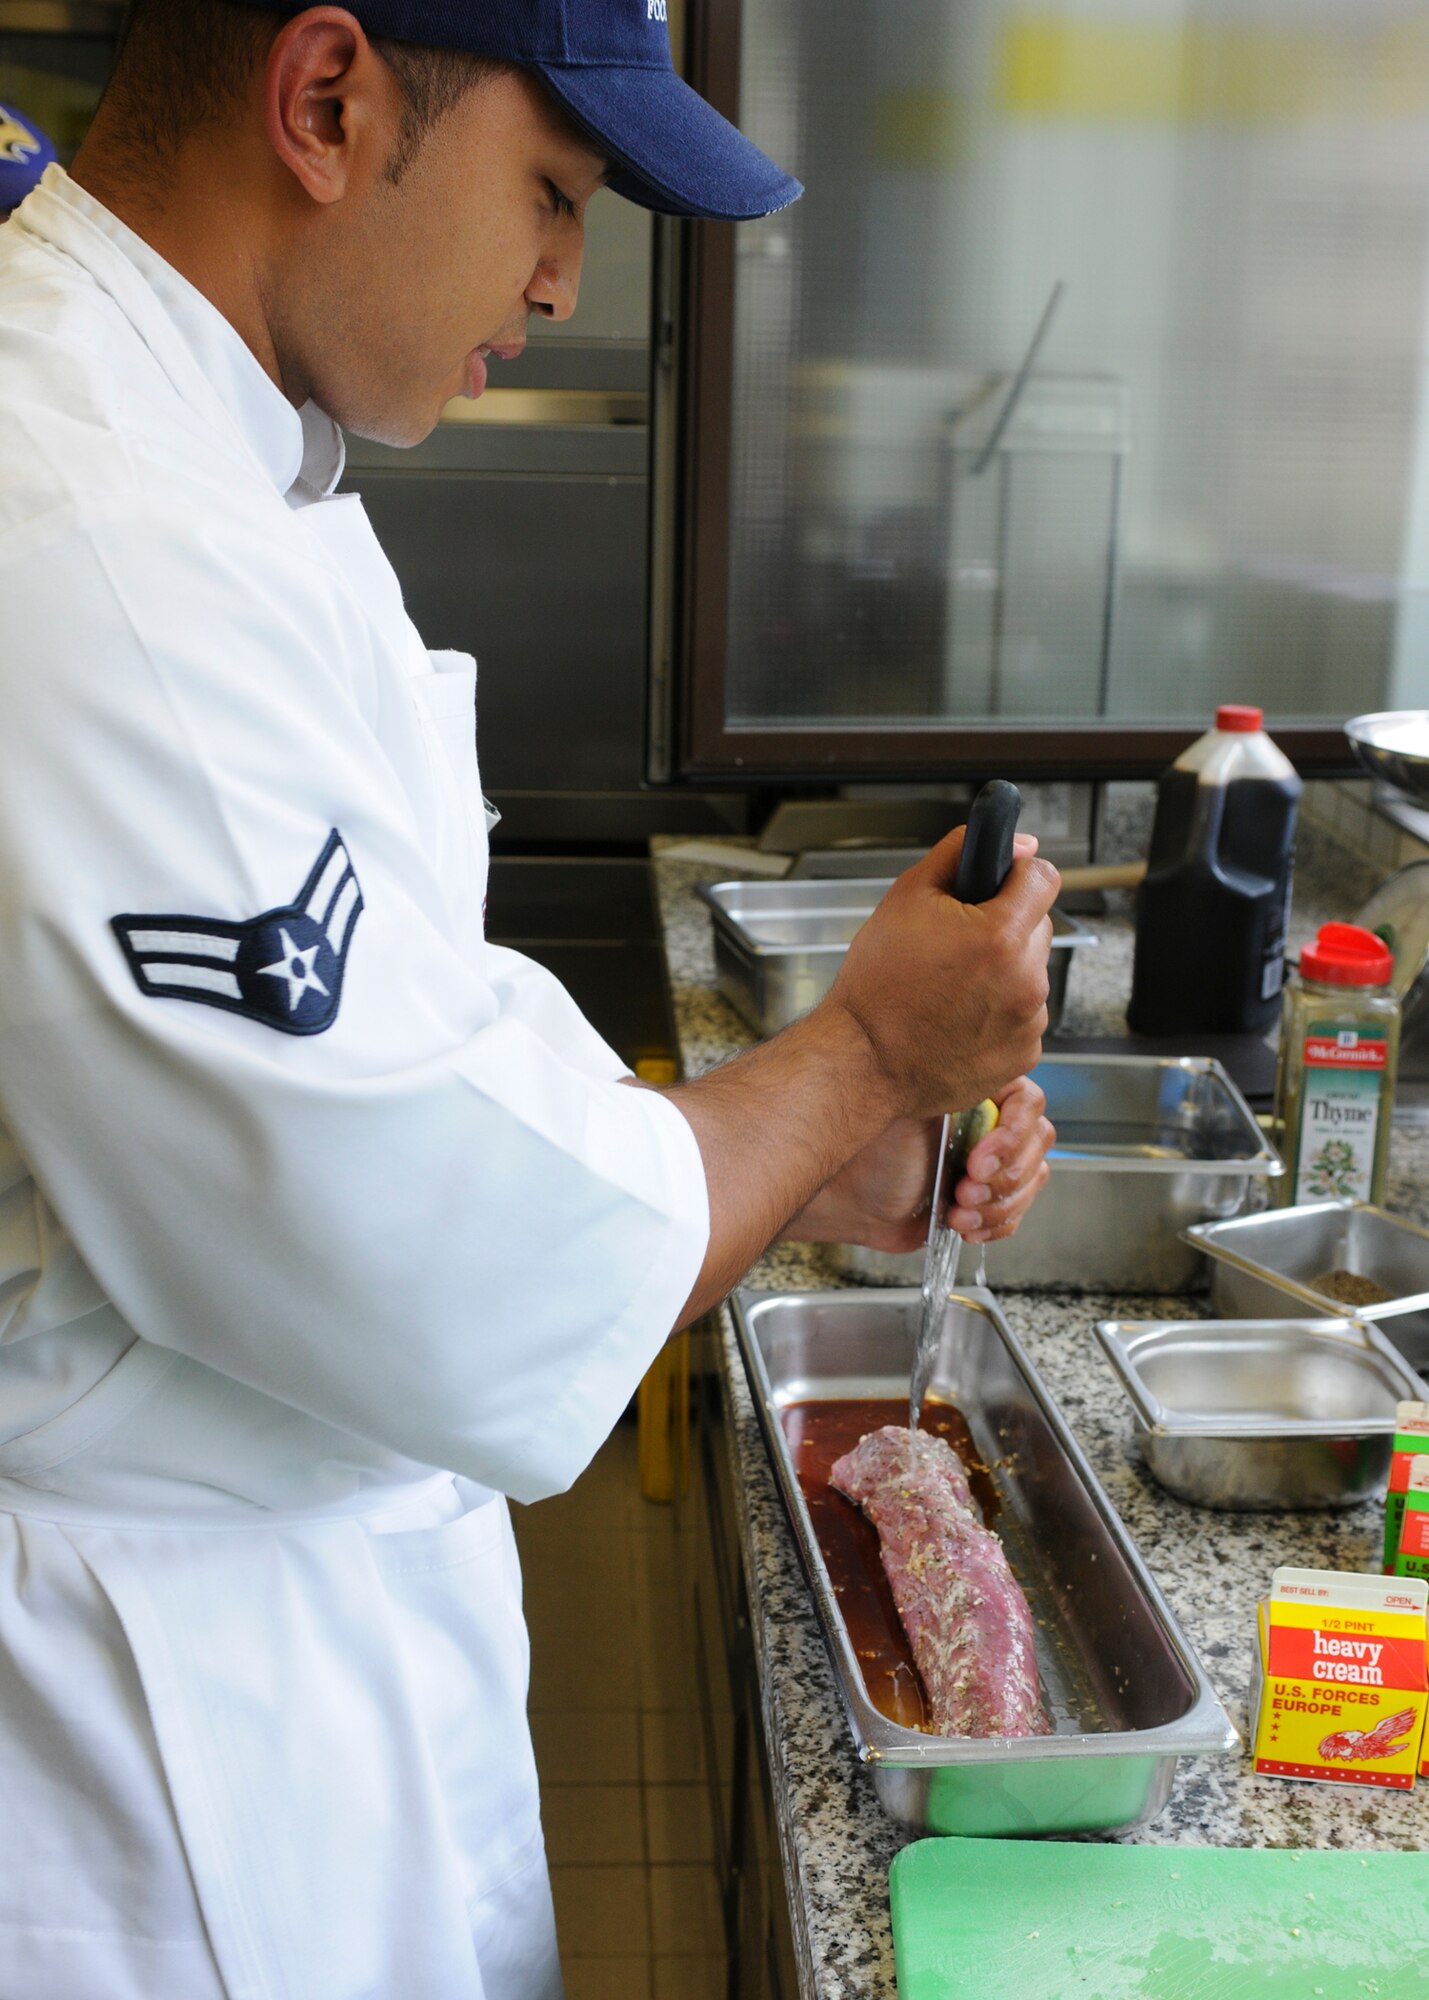 SPANGDAHLEM AIR BASE, Germany -- Airman 1st Class Jason Sugimoto, 52nd Force Support Squadron food service journeyman, squeezes lemon over a piece of pork before baking it July 30 at Kapaun Air Station, Germany. He was named one of two top chefs at the competition. Airman Sugimoto placed runner-up for the competition and was selected to attend the Culinary Institute of America in Napa Valley, California for training along with Iron Chef winner Staff Sgt. Kiana Mobley, 48th Force Support Squadron, Royal Air Force Lakenheath. (U.S. Air Force photo by Airman 1st Class Nathanael Callon)